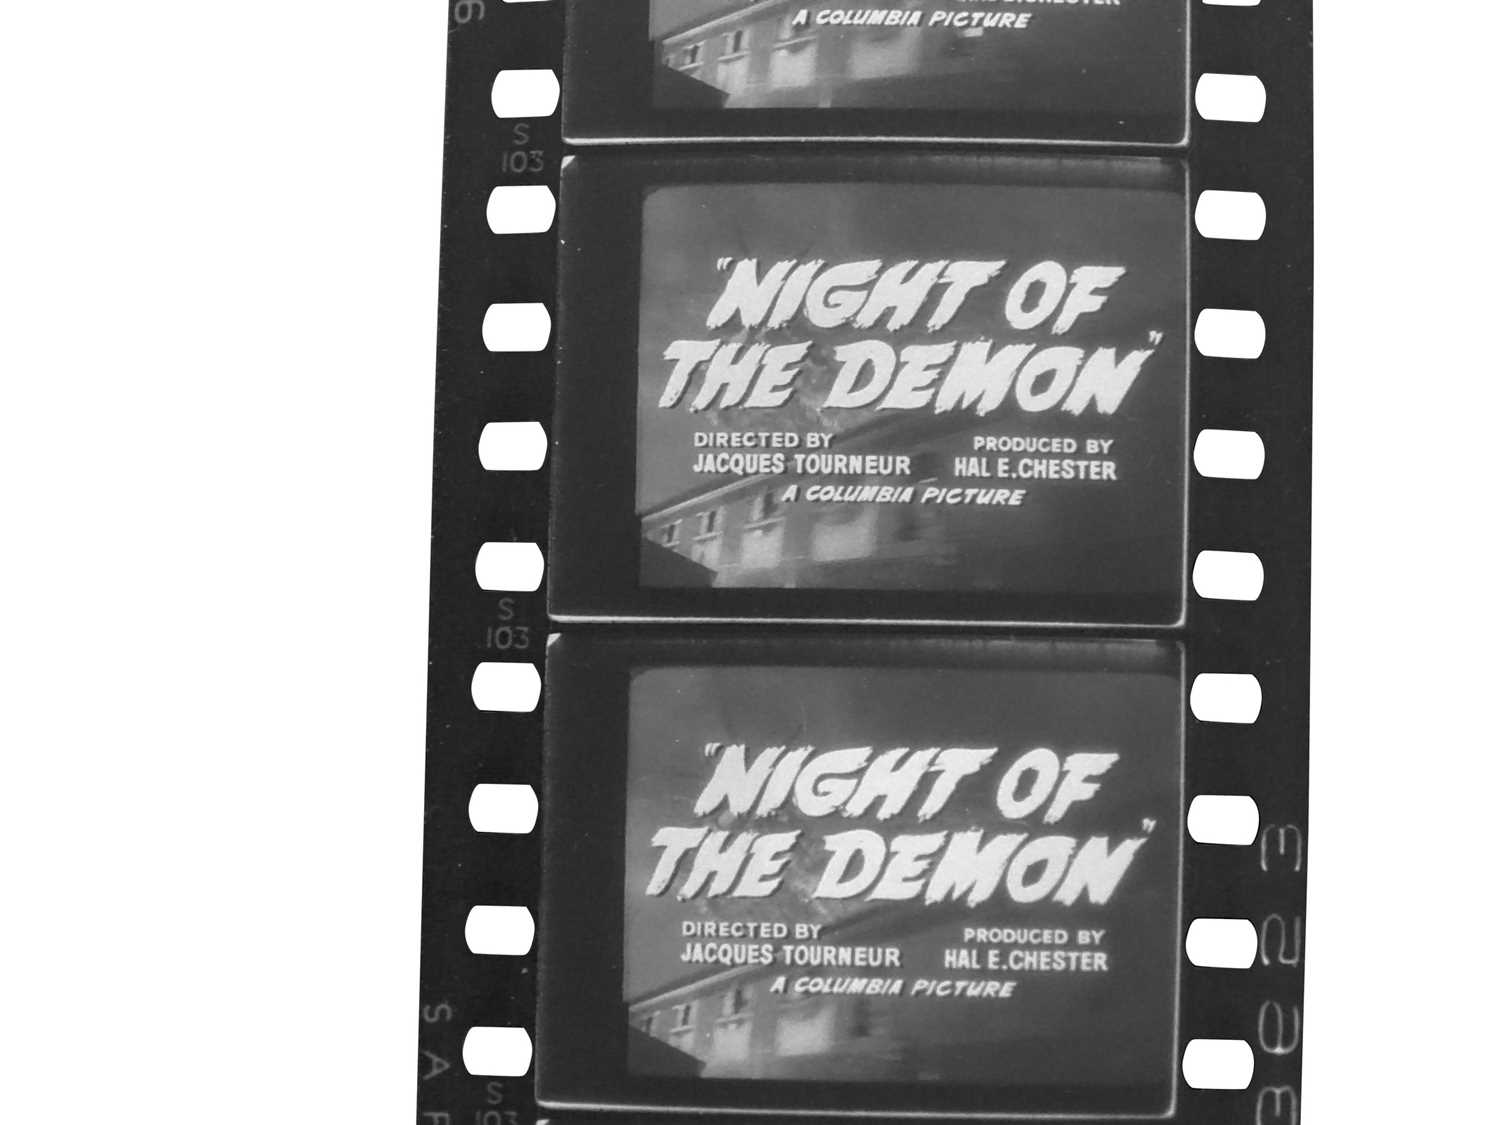 Night Of The Demon (1957) - Image 4 of 6